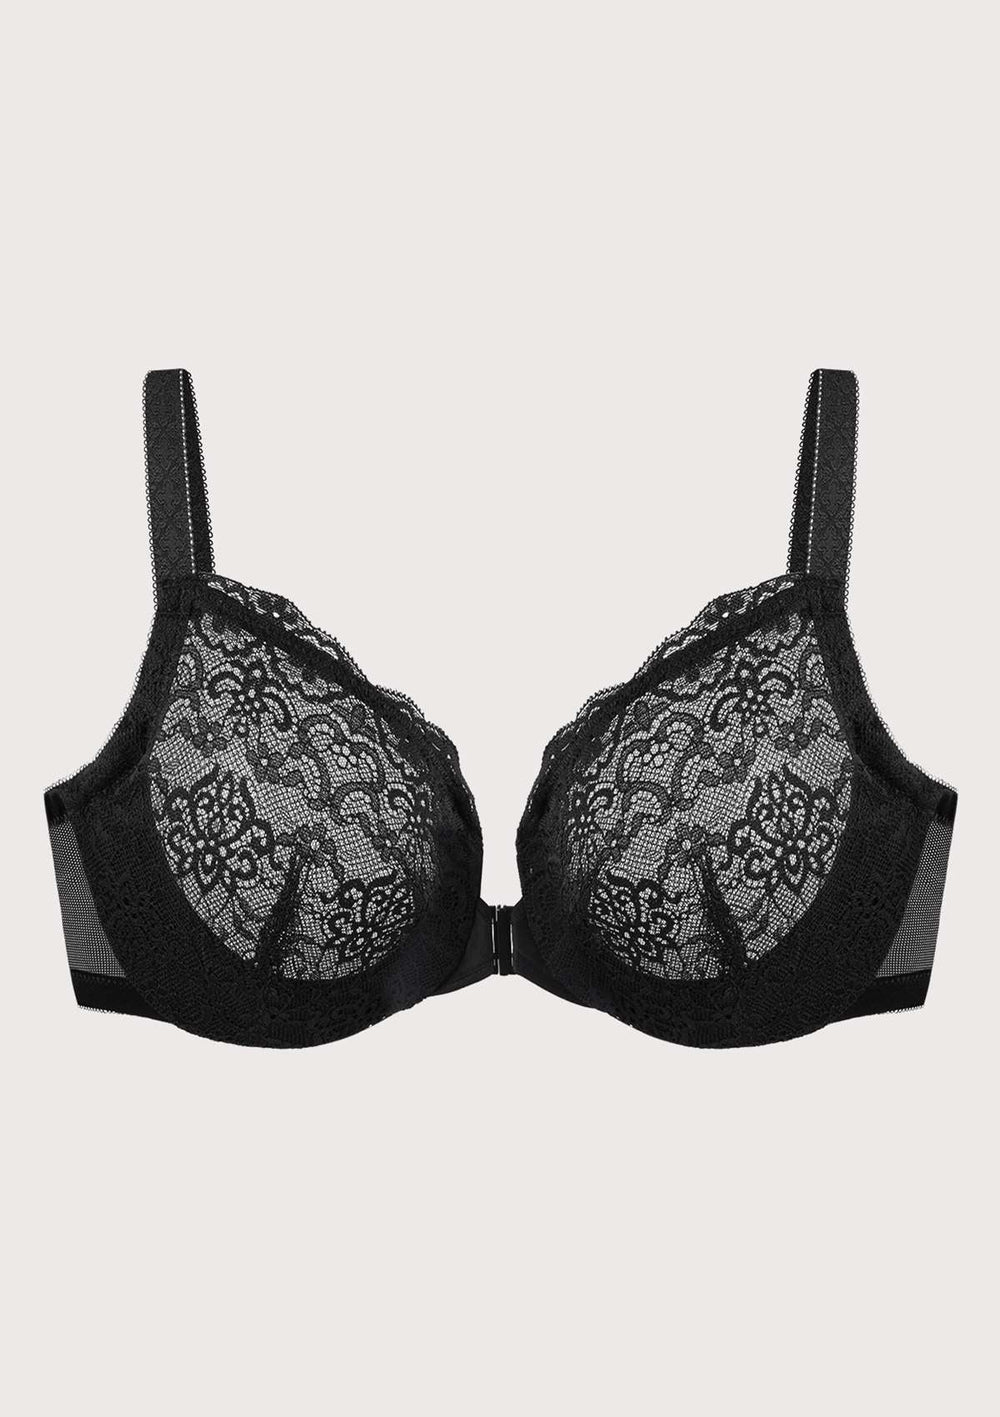 Women'S Front Closure Lace Beauty Back Push Up Bra With Pad, Floral Lace T- Back Underwear